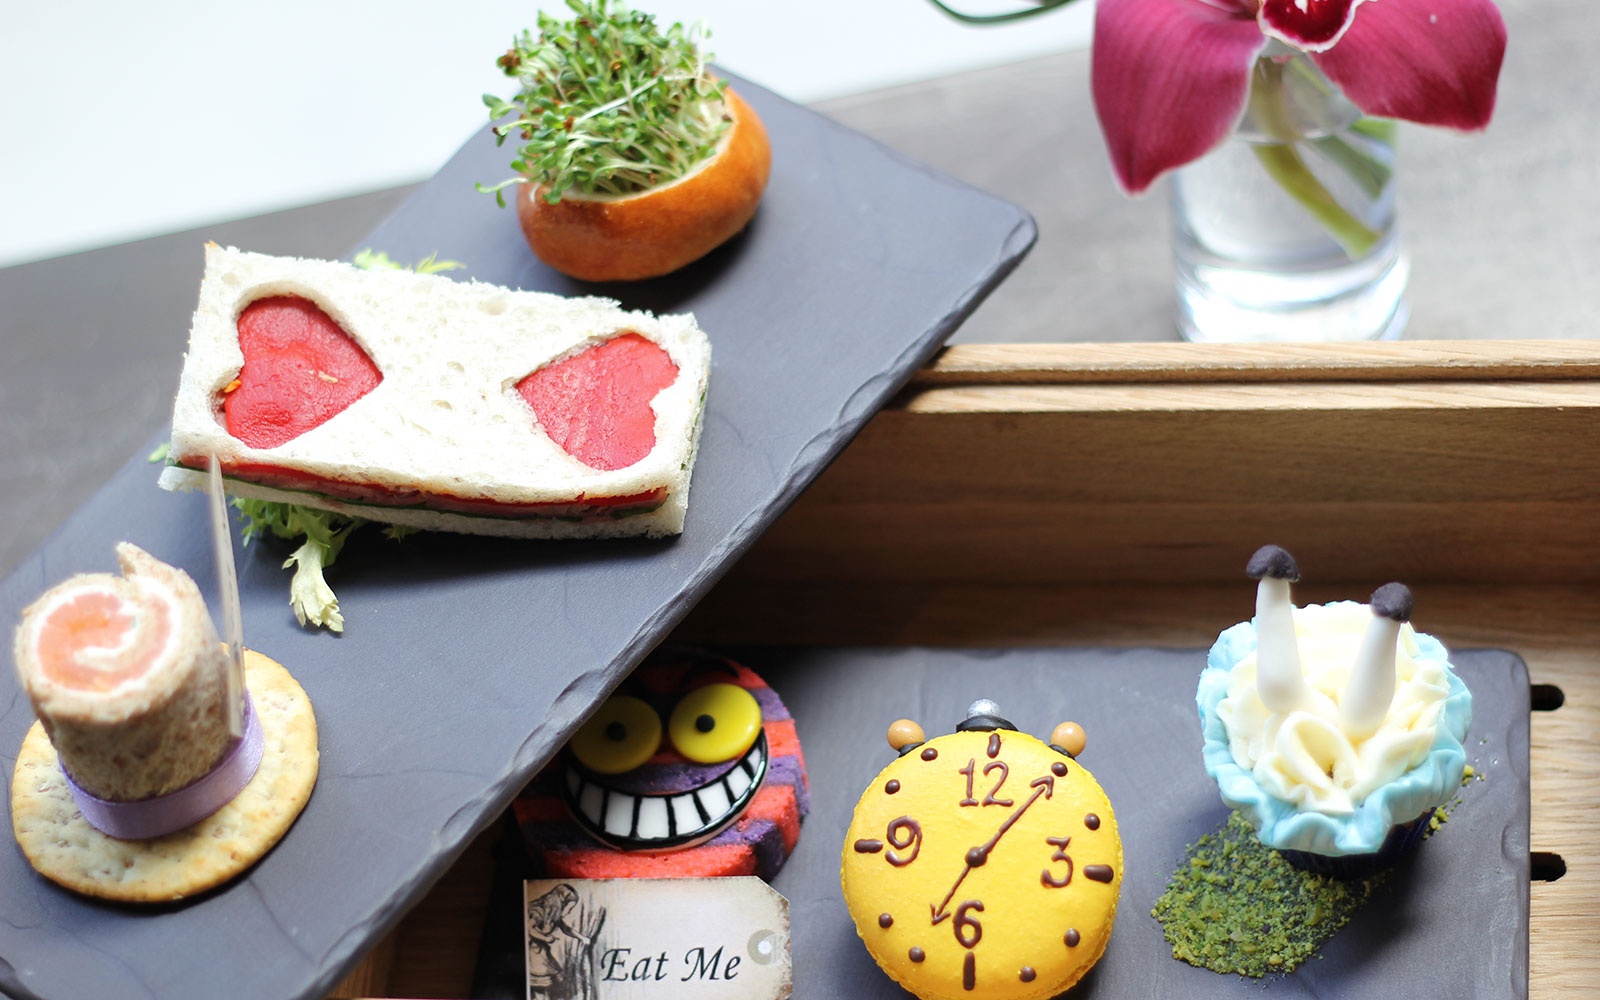 This is What a $150 Afternoon Tea Looks Like